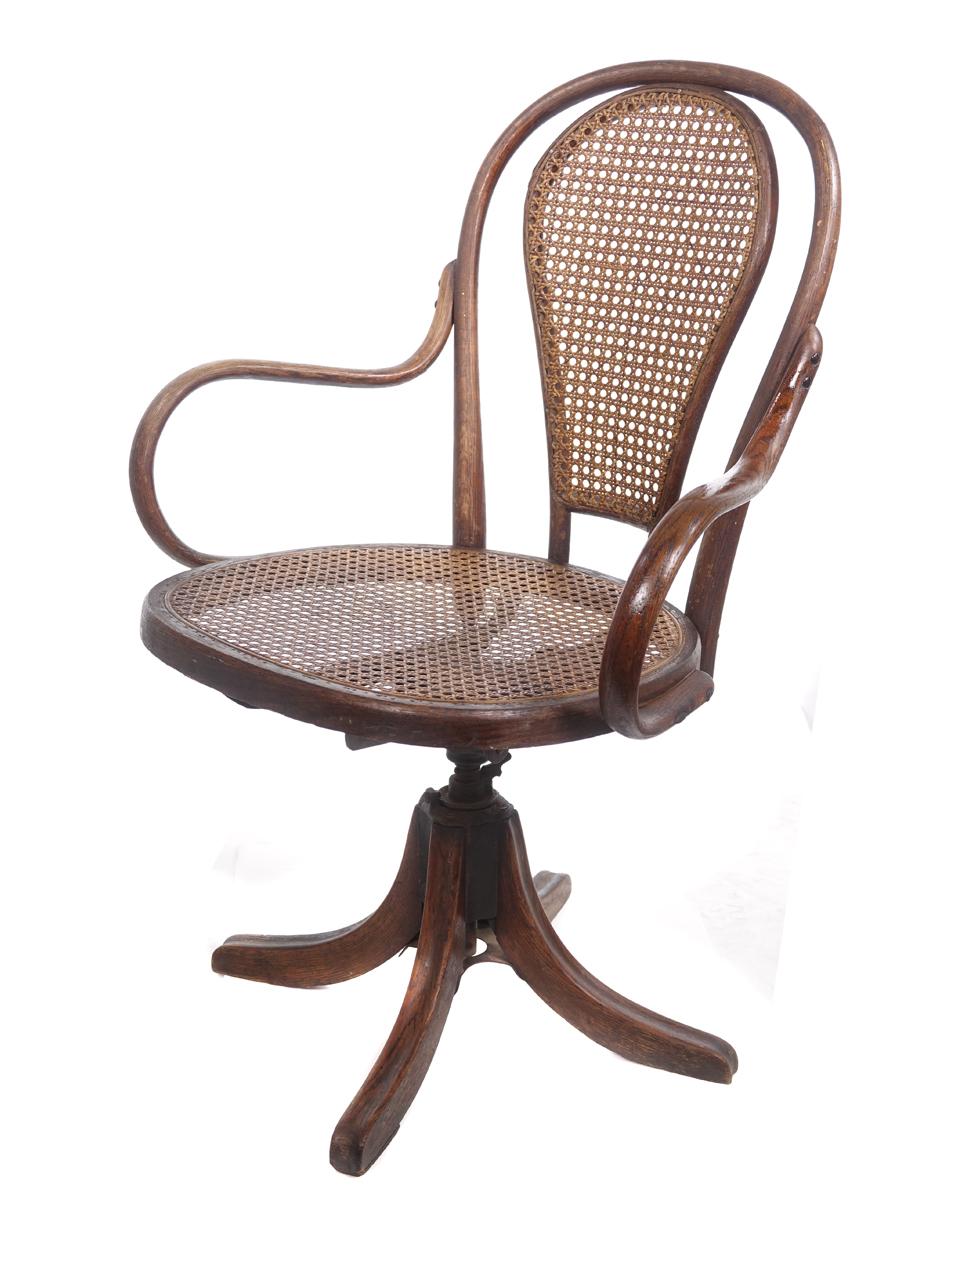 This is one of the nicest looking chairs. It's one of my favorites and we have one at home. The shape, scale, and canning make this an elegant choice. It has a nice aged patina.